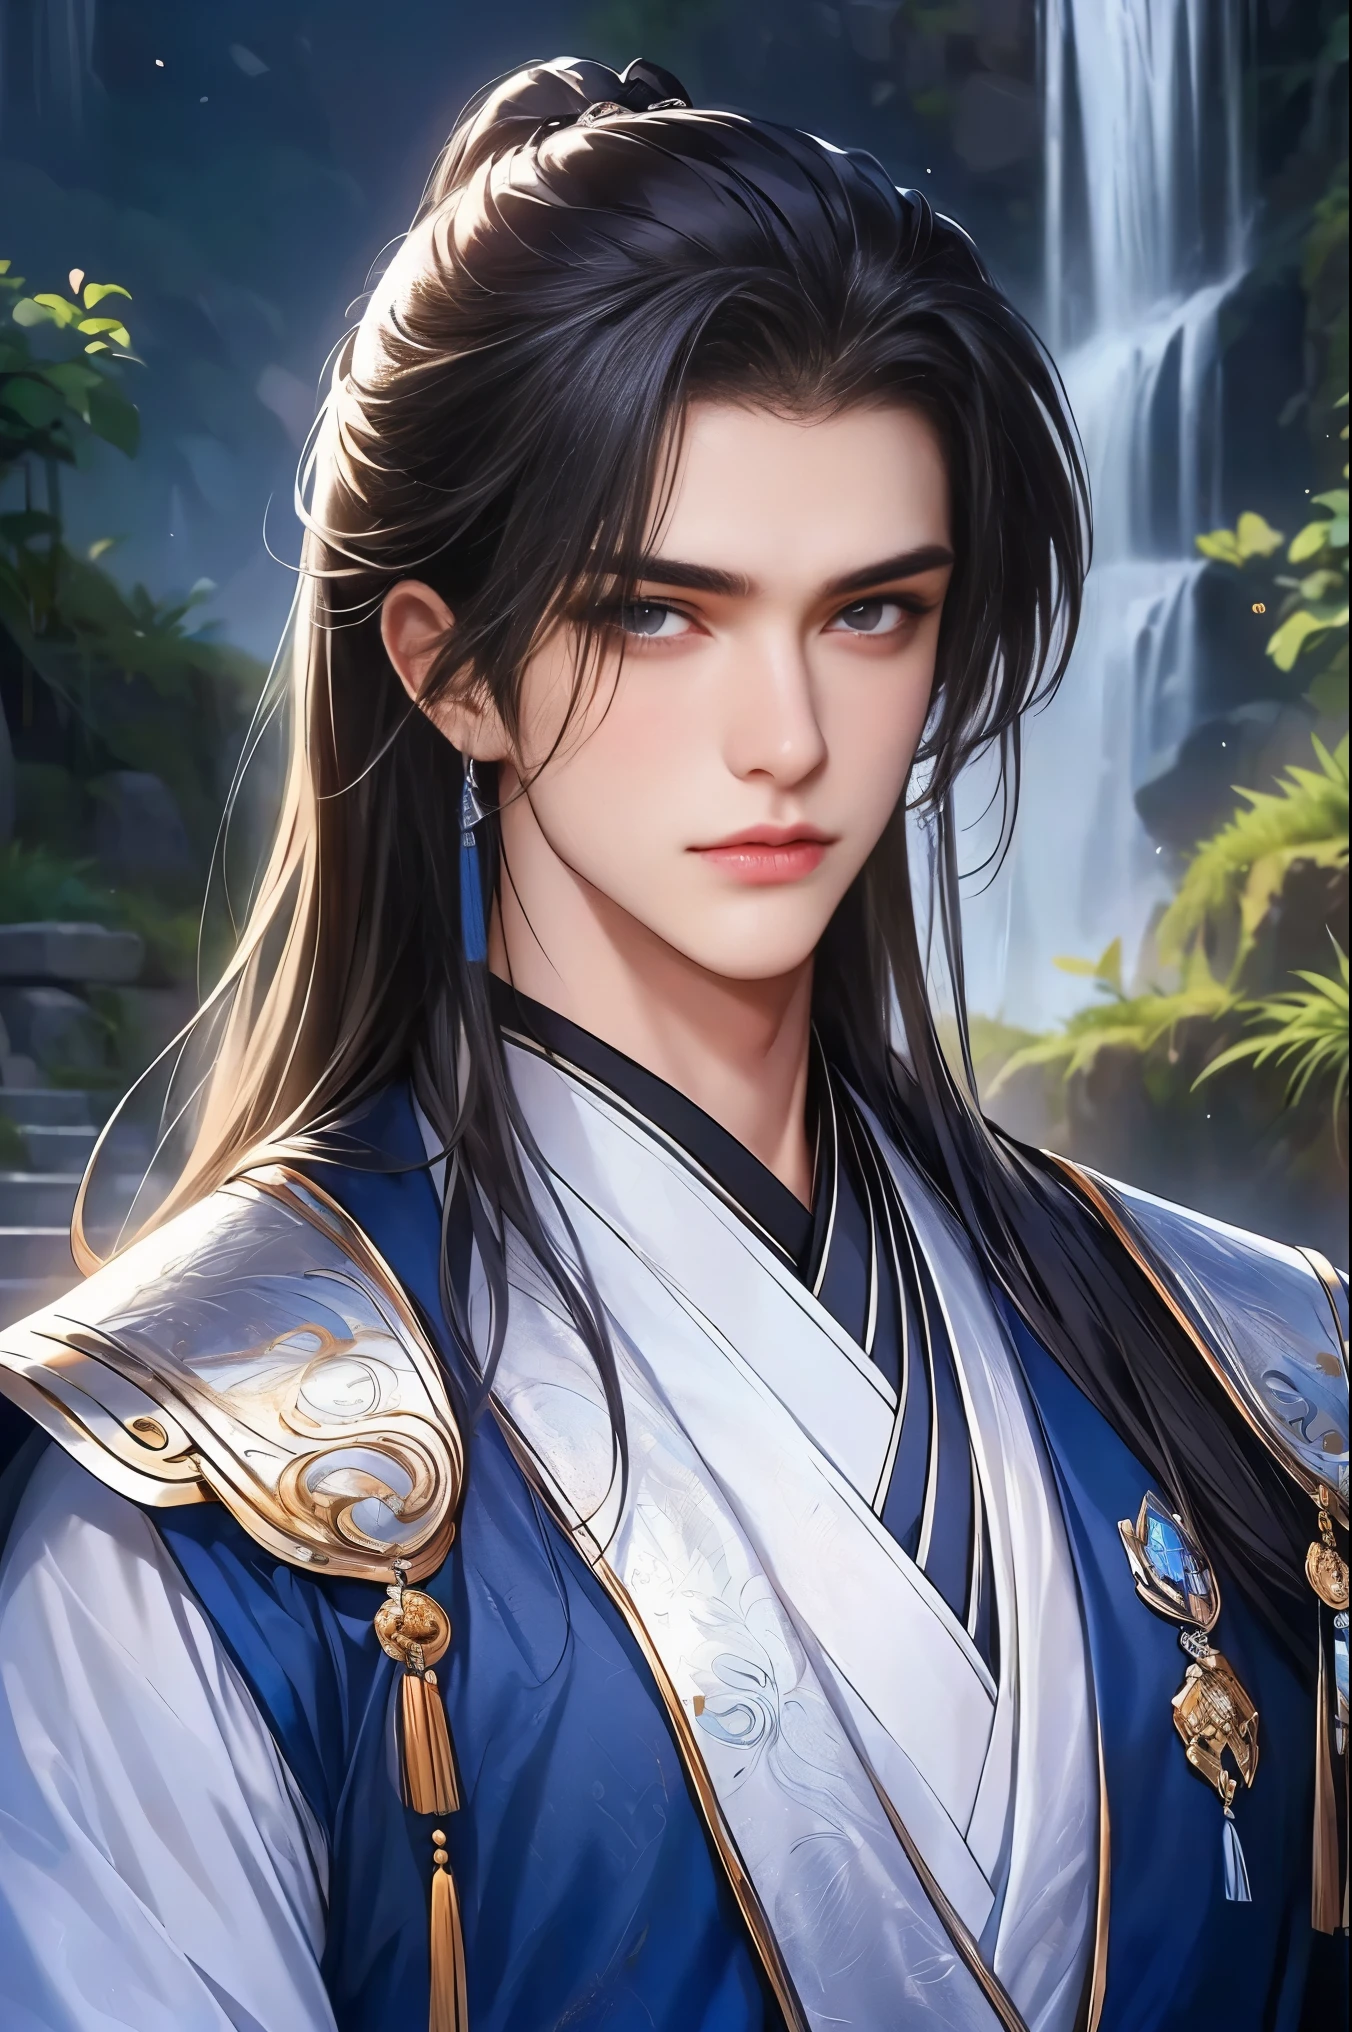 (Best quality,A high resolution,The image is clear:1.2),Ultra detailed backgrounds,Beautiful man standing holding sword，this it，wind blowing through，Chinese style clothes,（Clothes are：1.5），Garden scene,under moonlight,waterfall man，Romantic atmosphere,Dutch Angle Shot,gentlesoftlighting,shelmet，portrait of upper body，